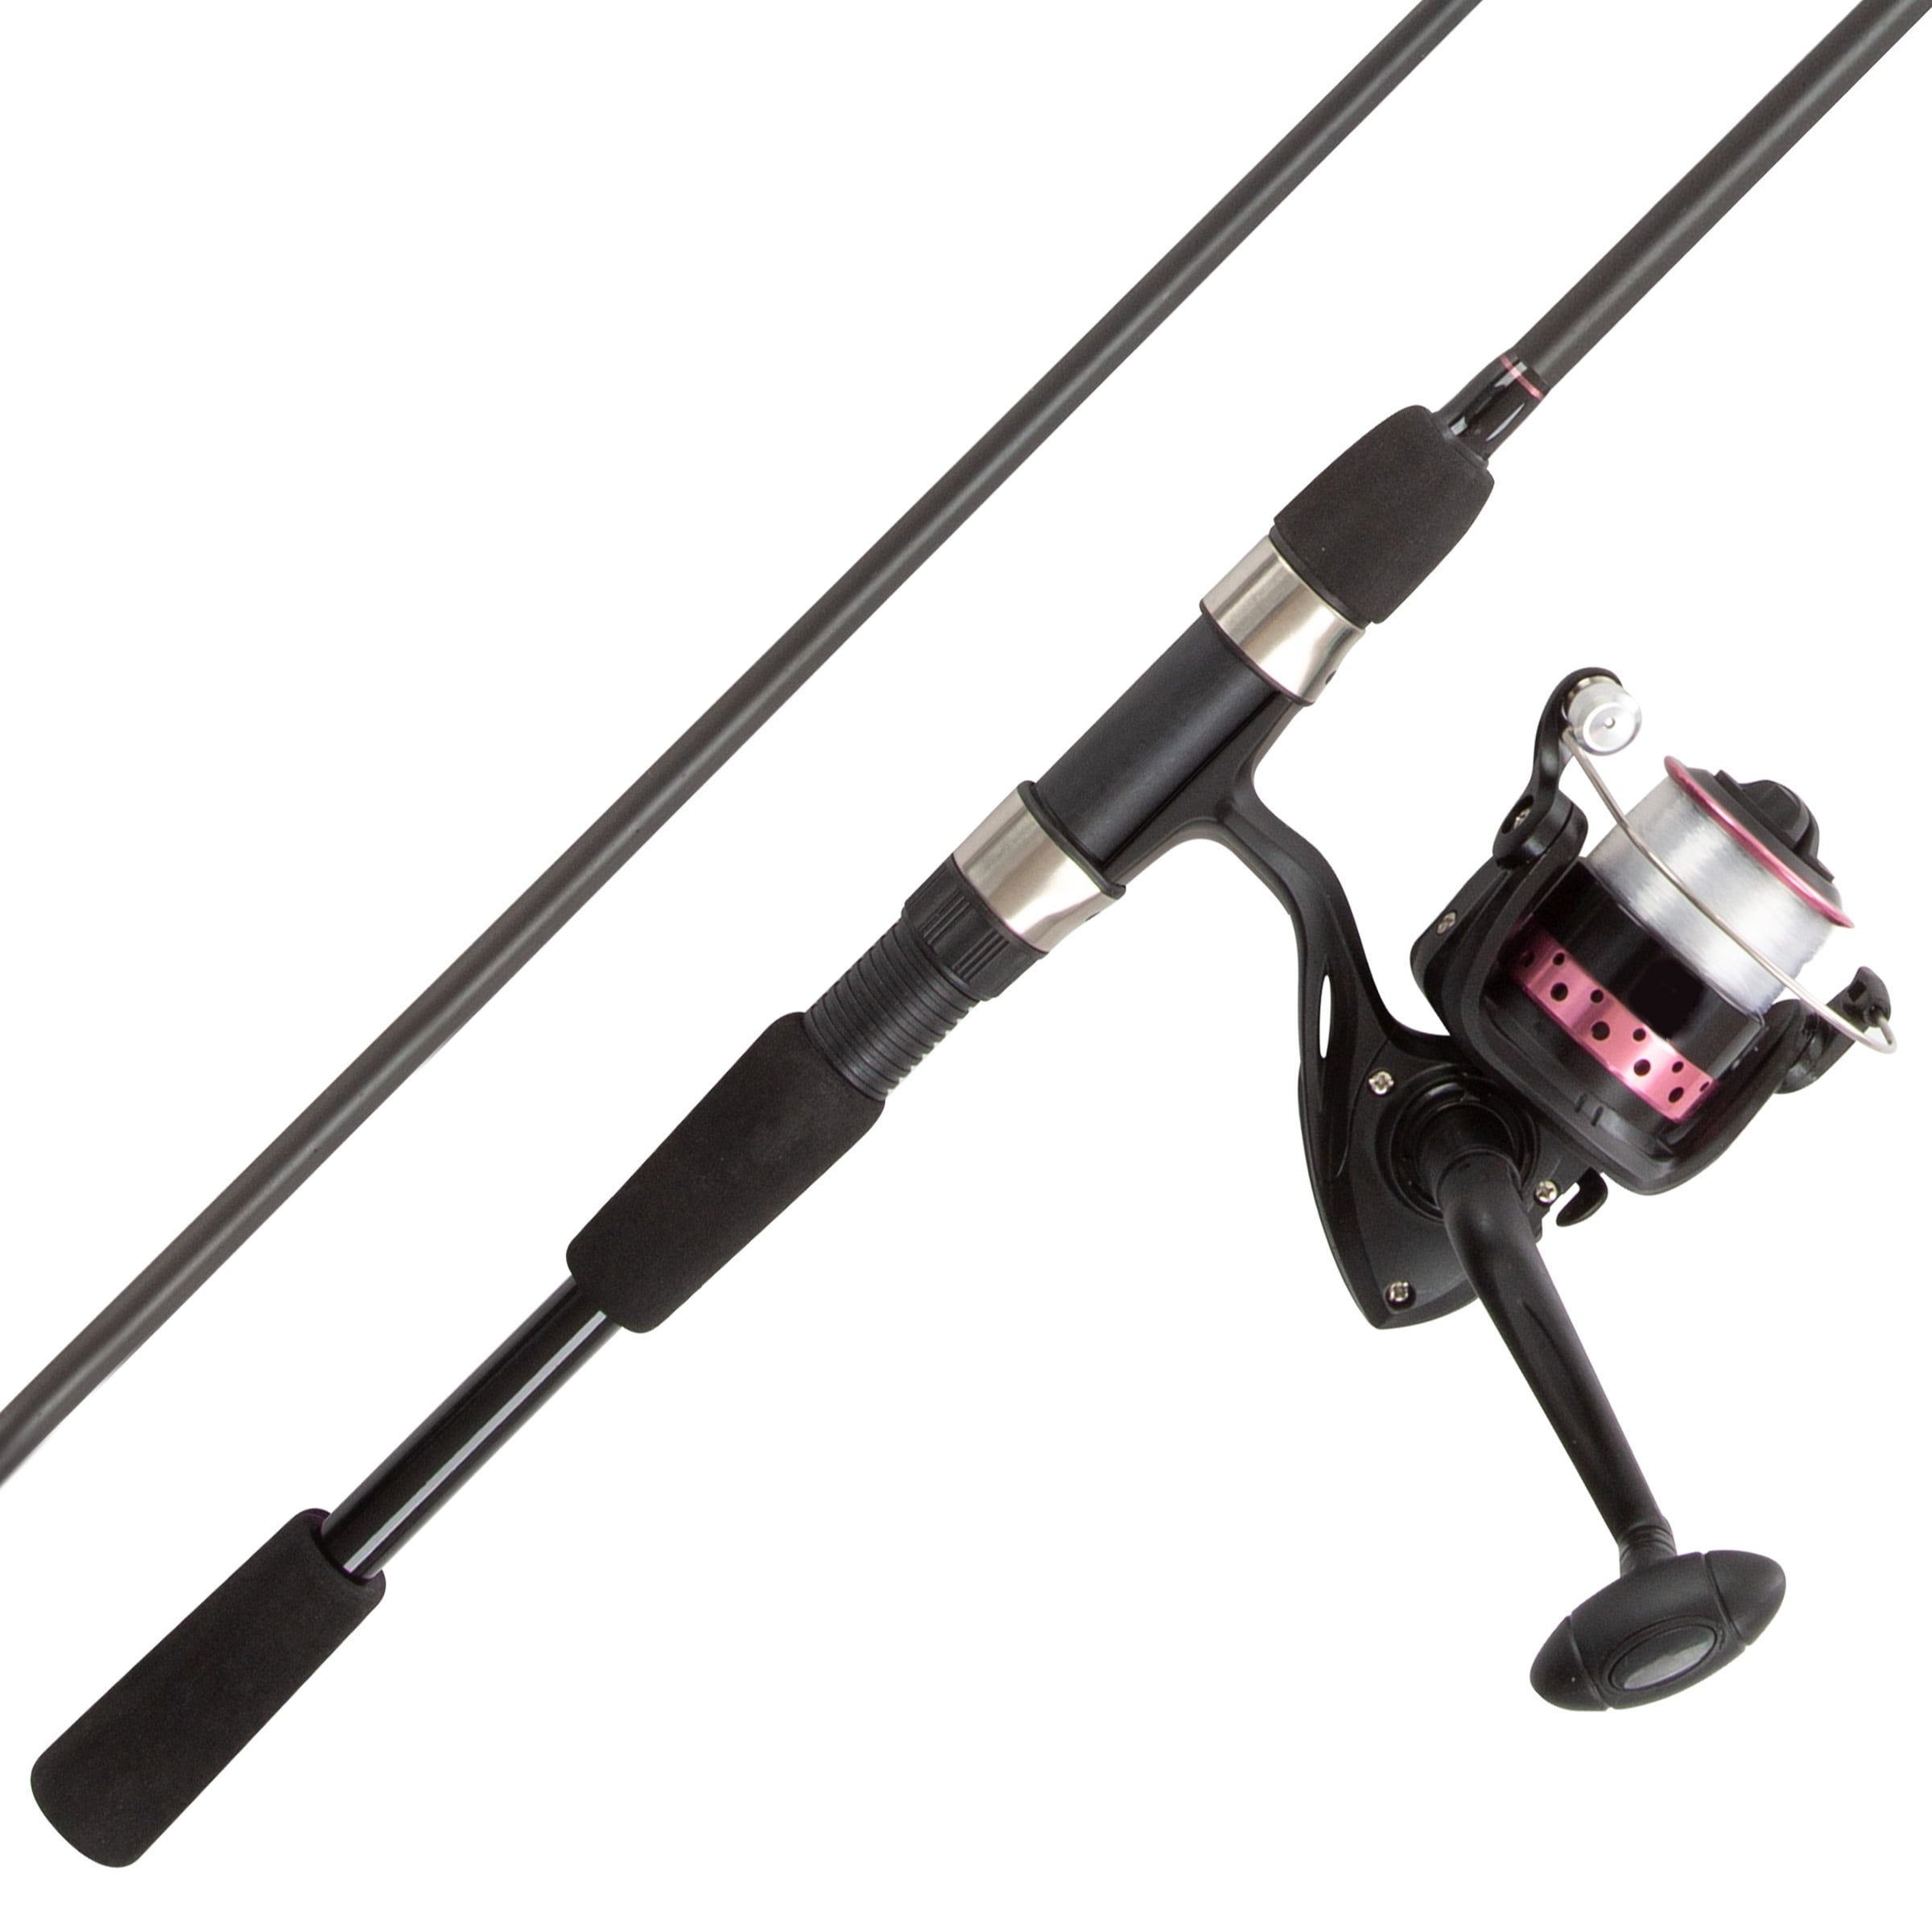 Ugly Stik 7' GX2 Spinning Fishing Rod and Reel Spinning Combo